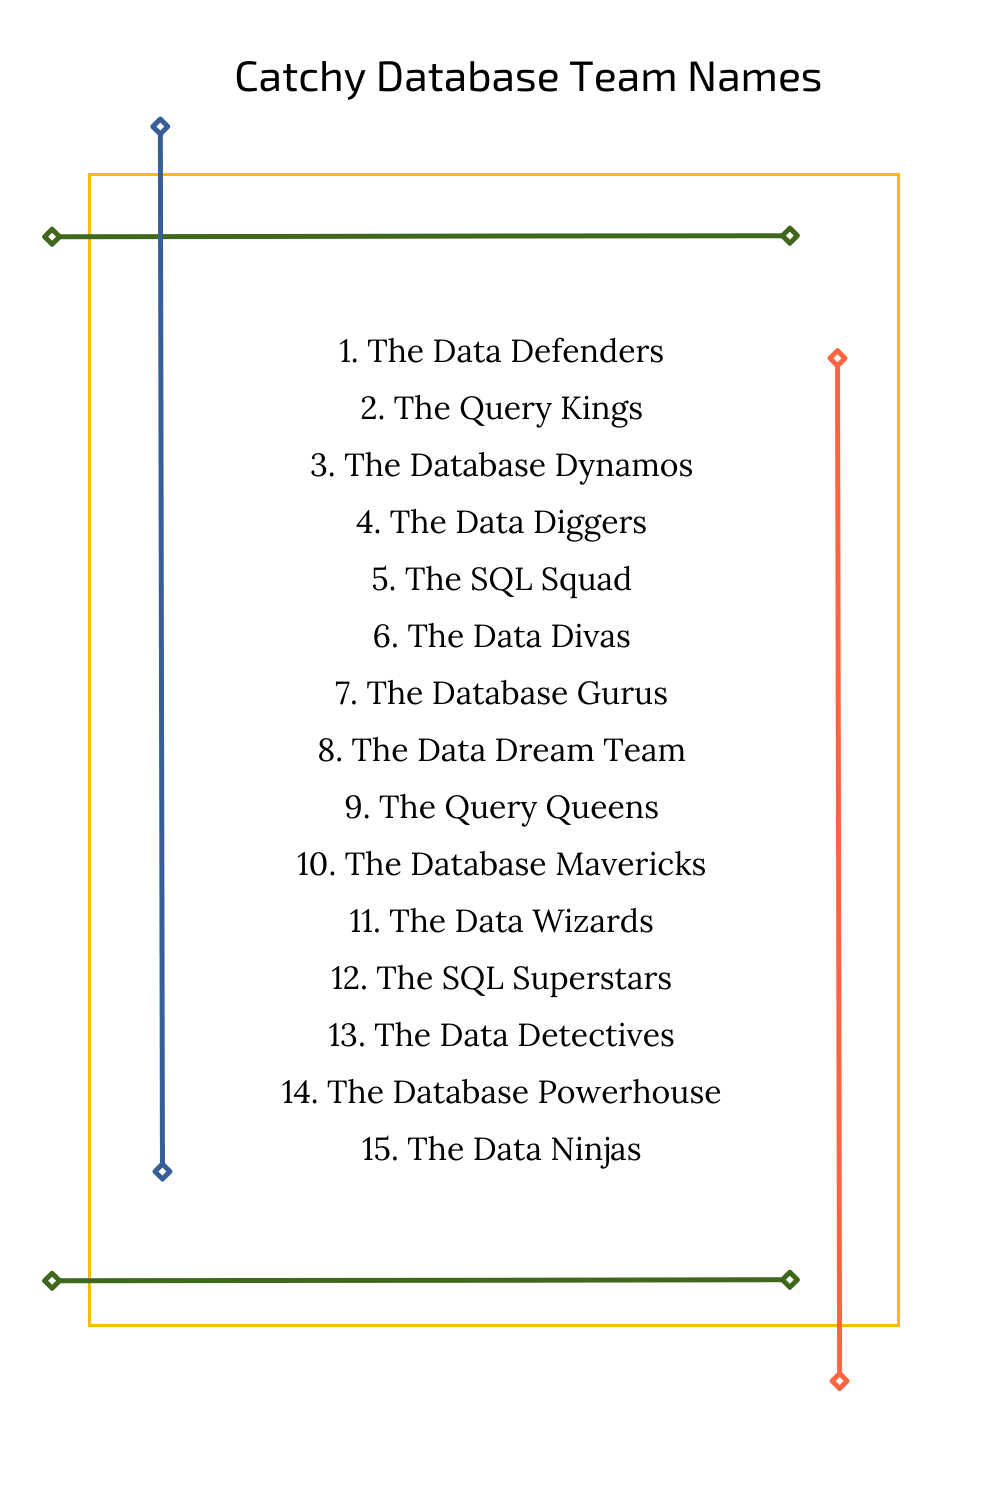 Catchy Database Team Names